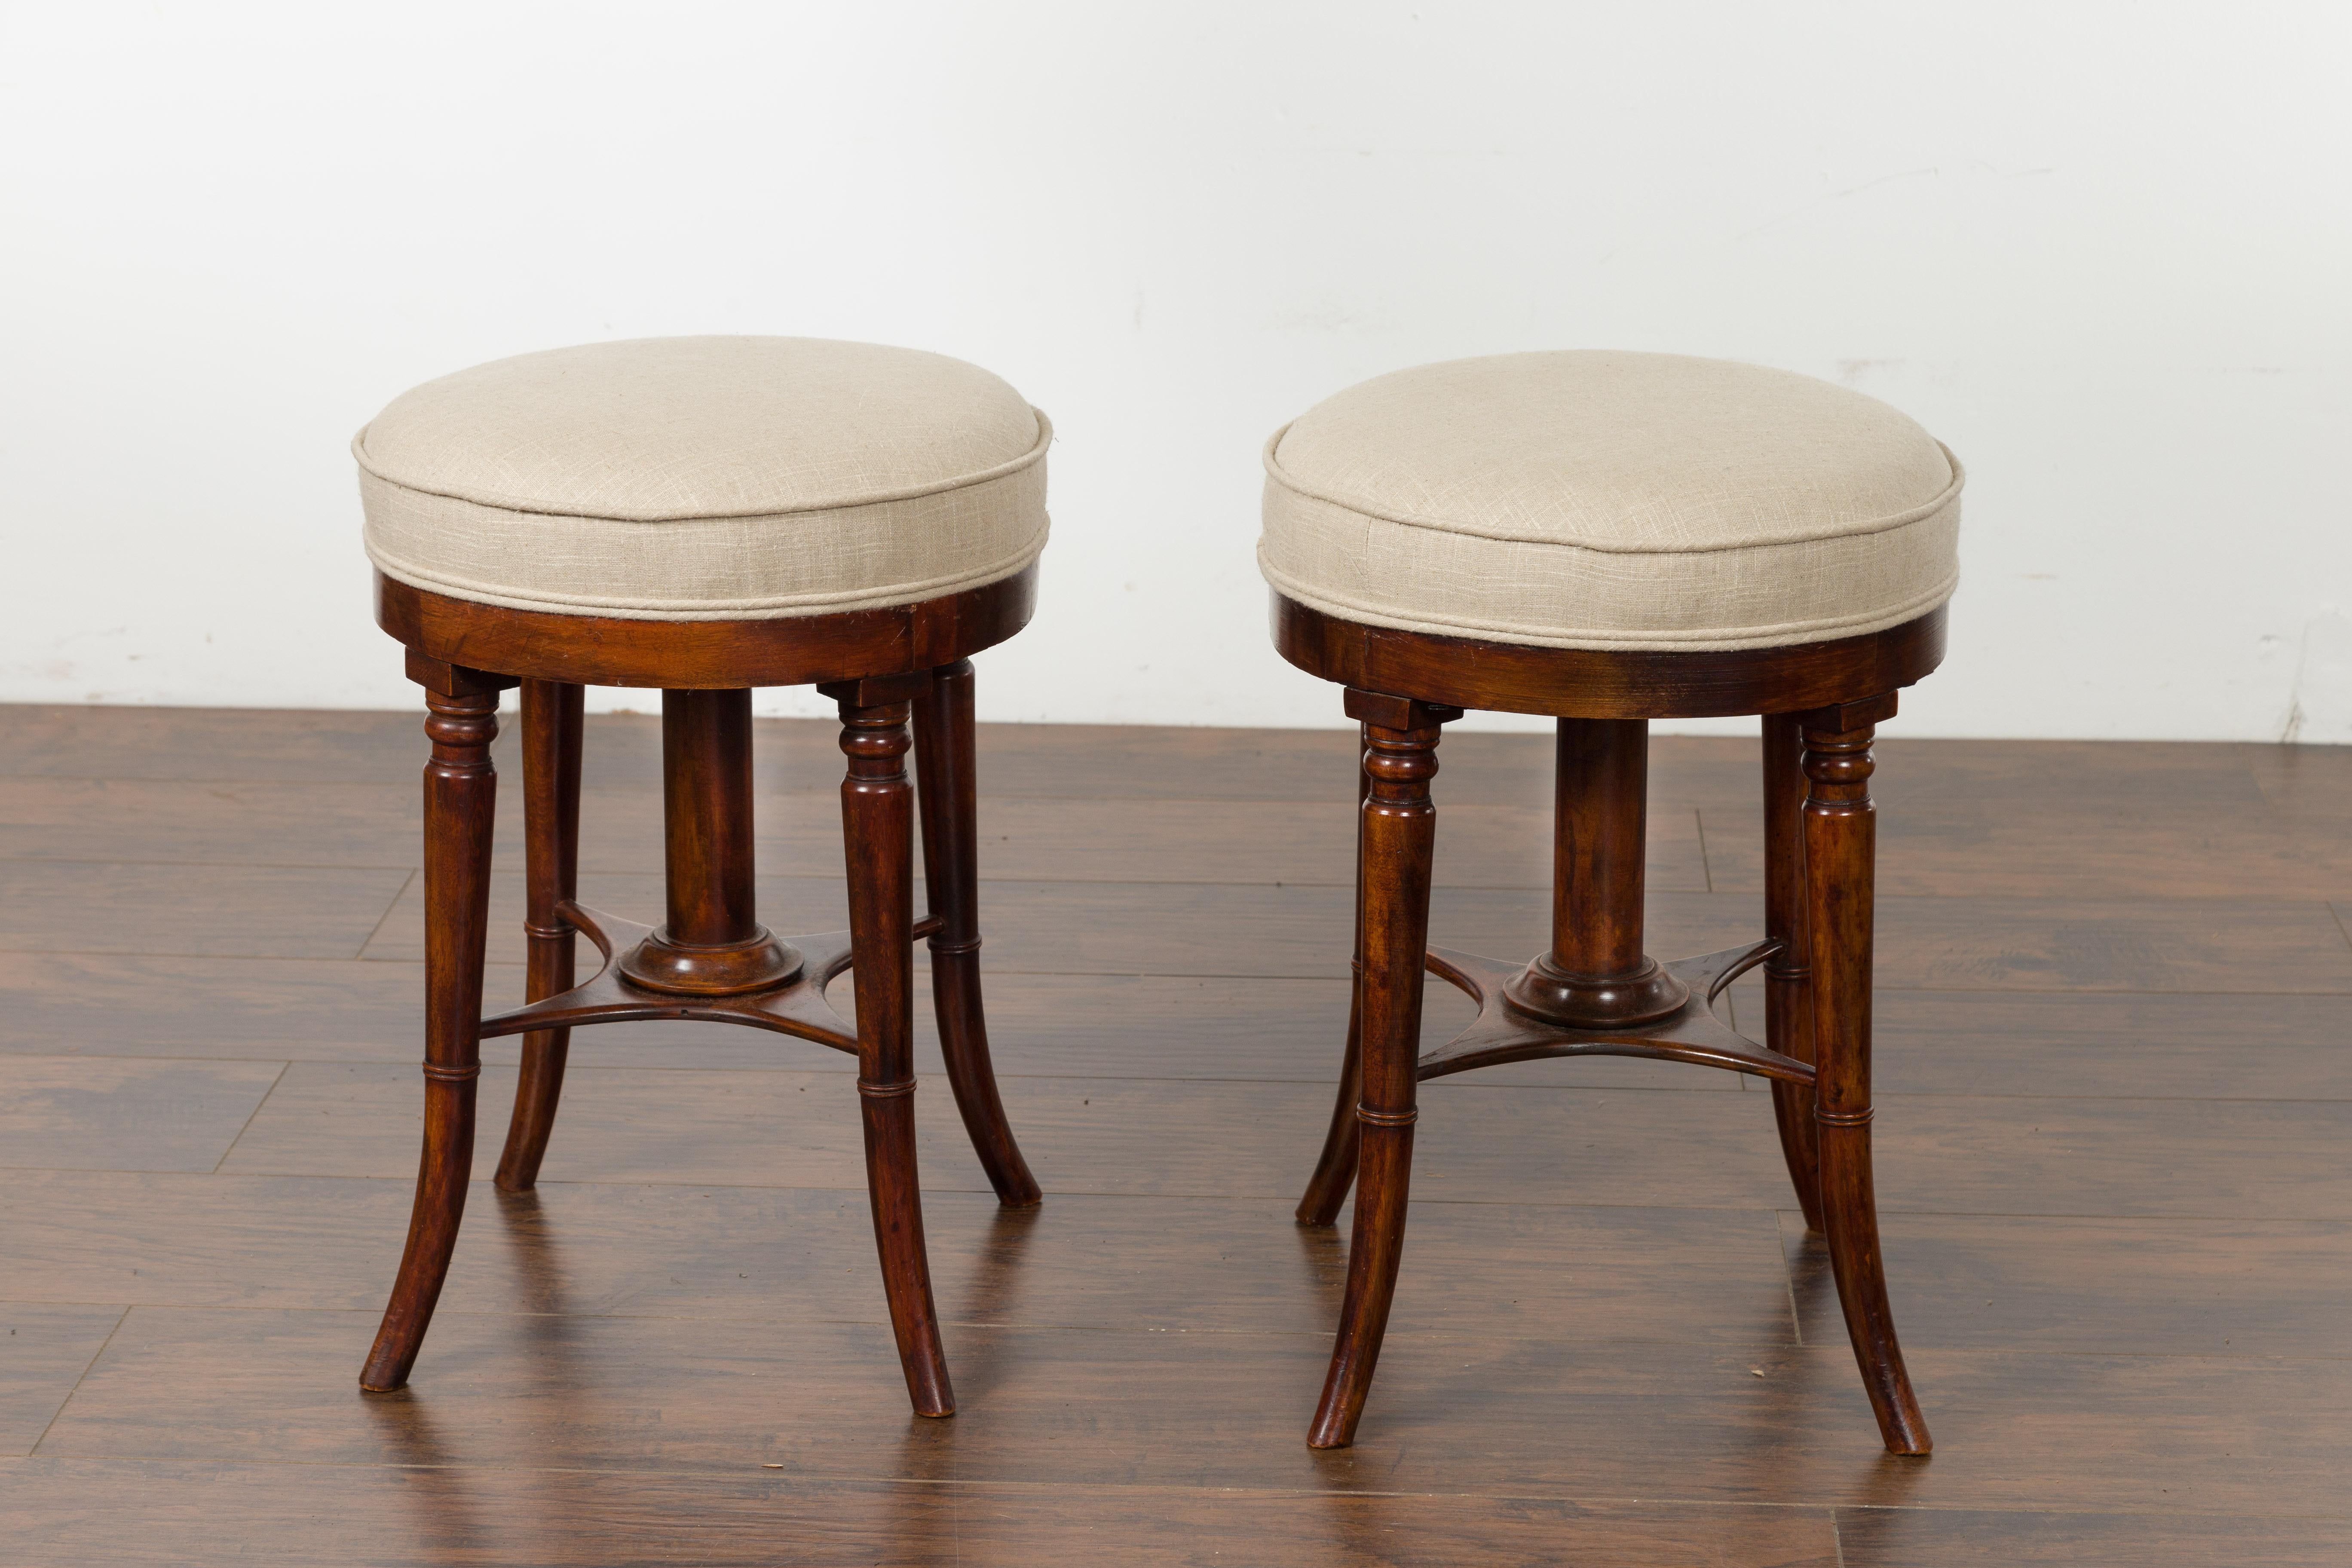 Pair of English 1920s Mahogany Stools with Turned Legs and New Upholstery For Sale 7